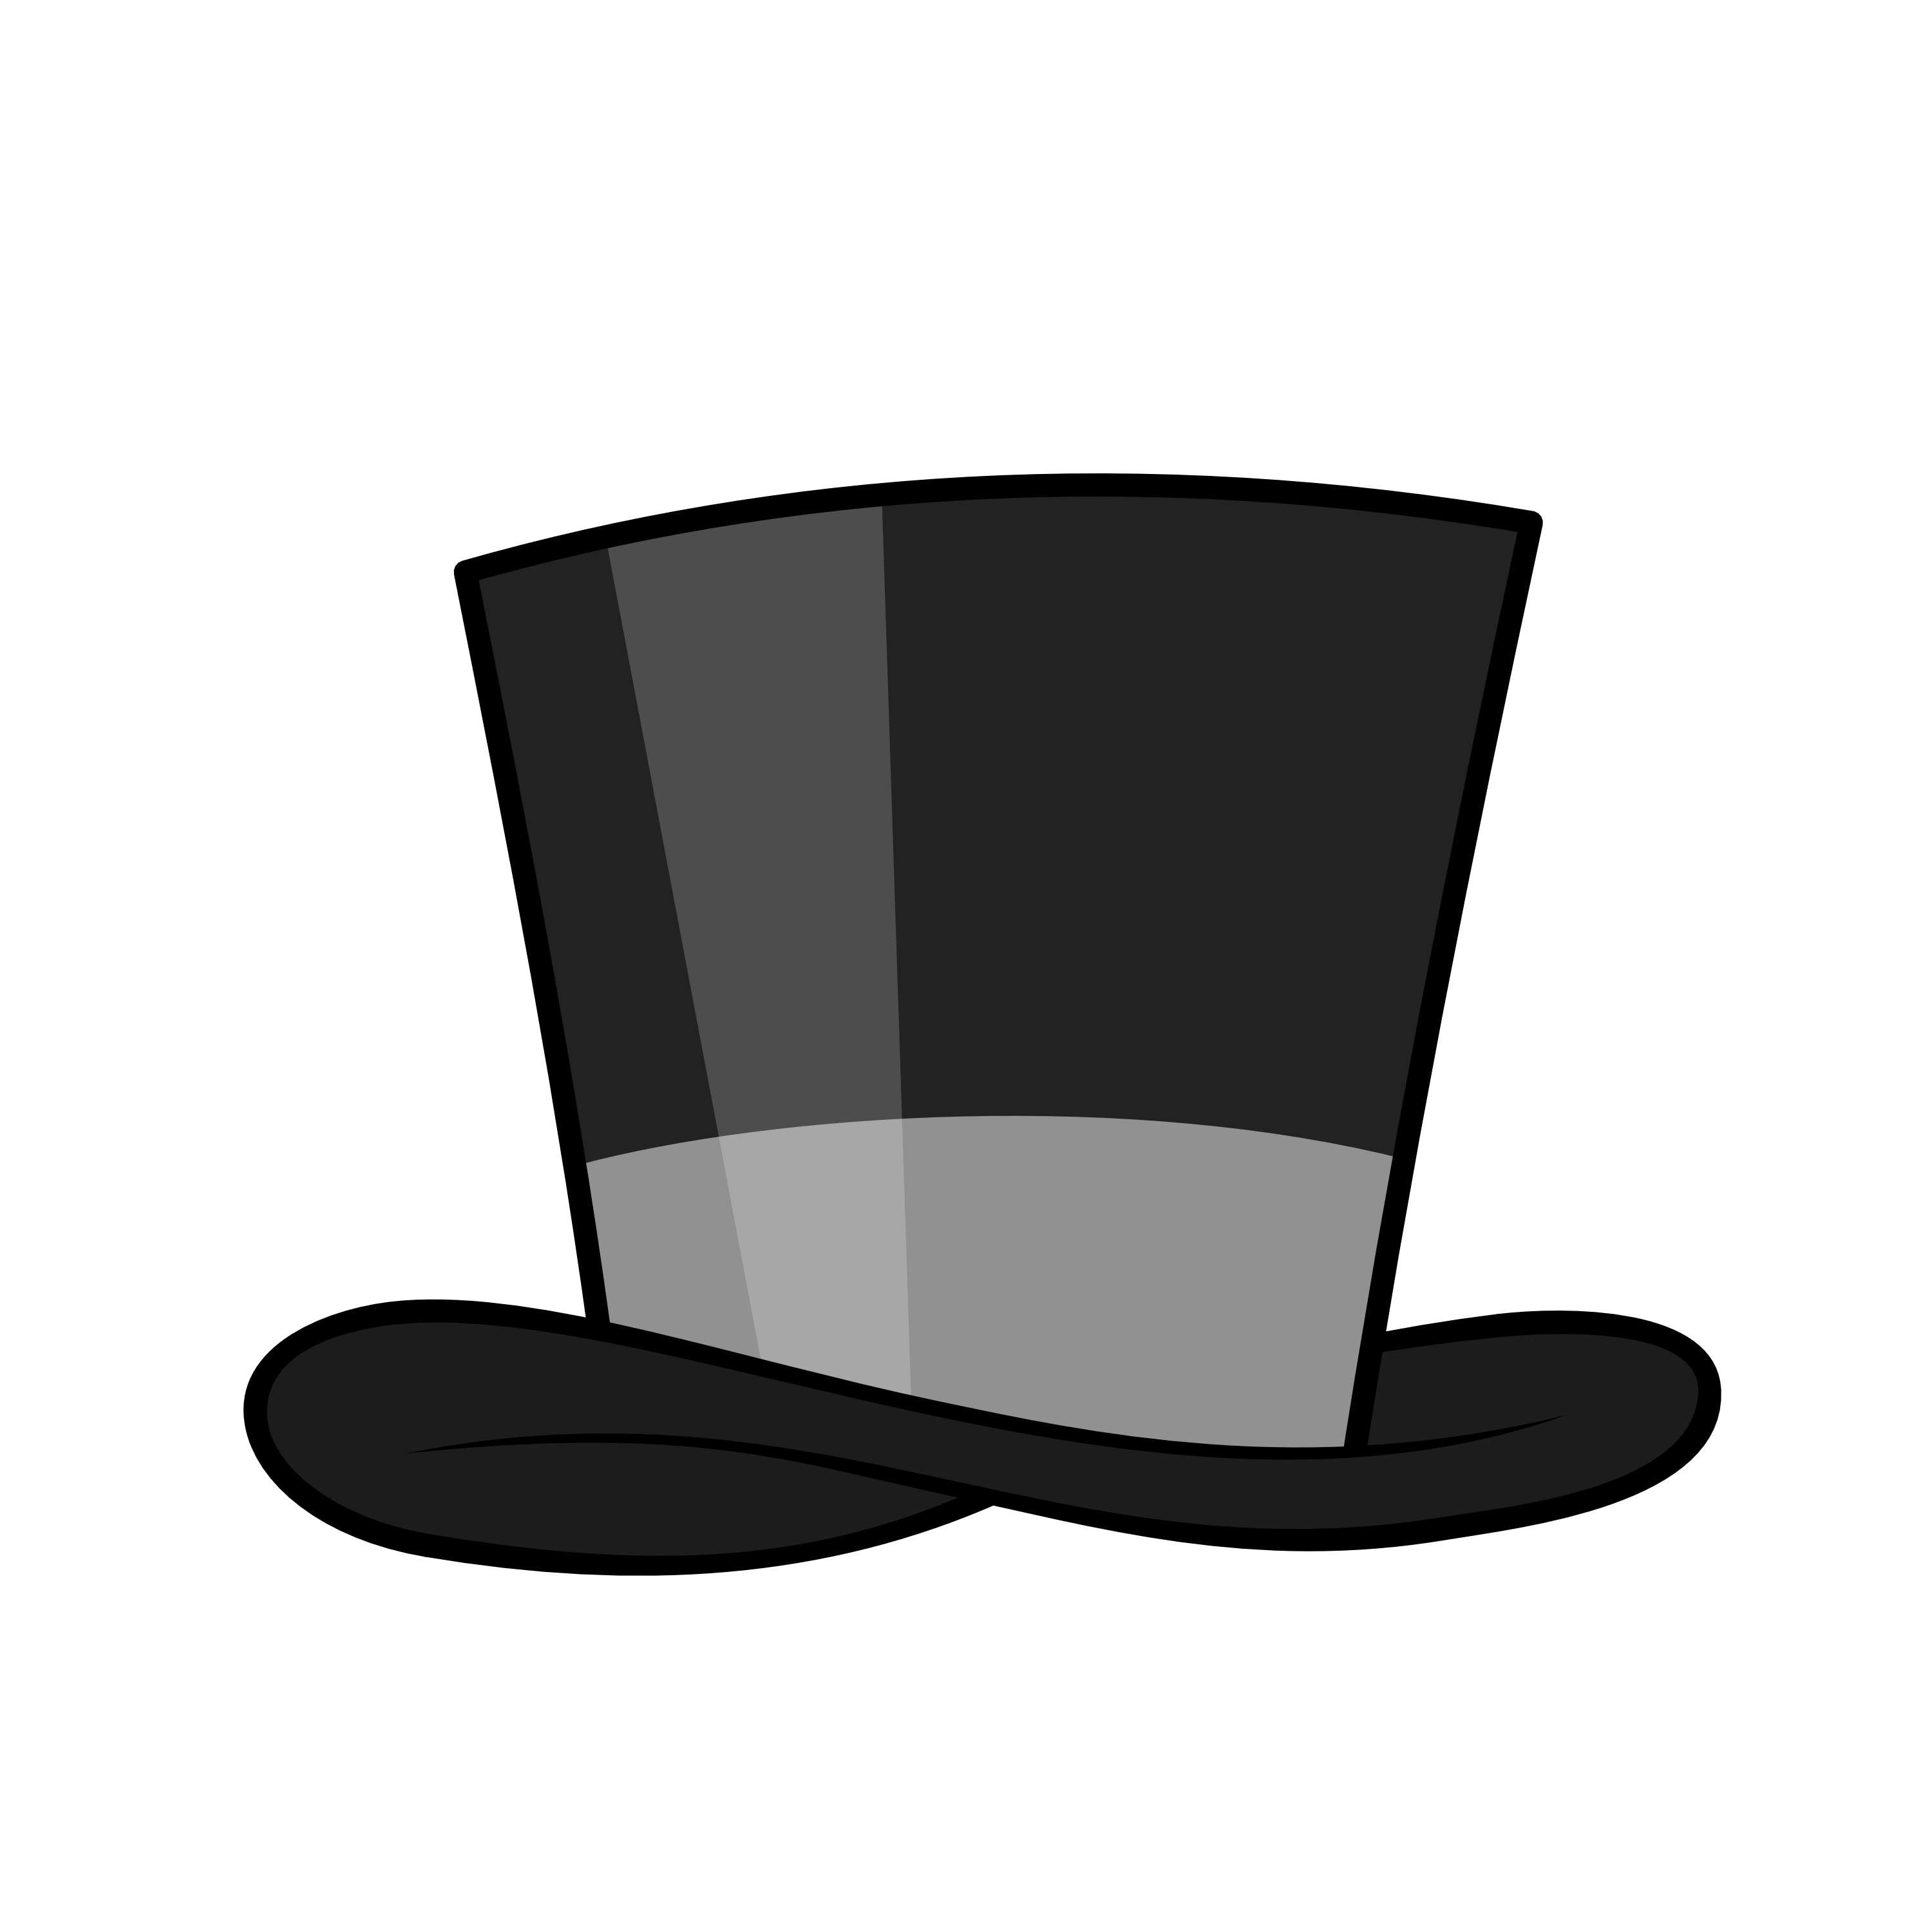 Image gallery for : top hat transparent background png